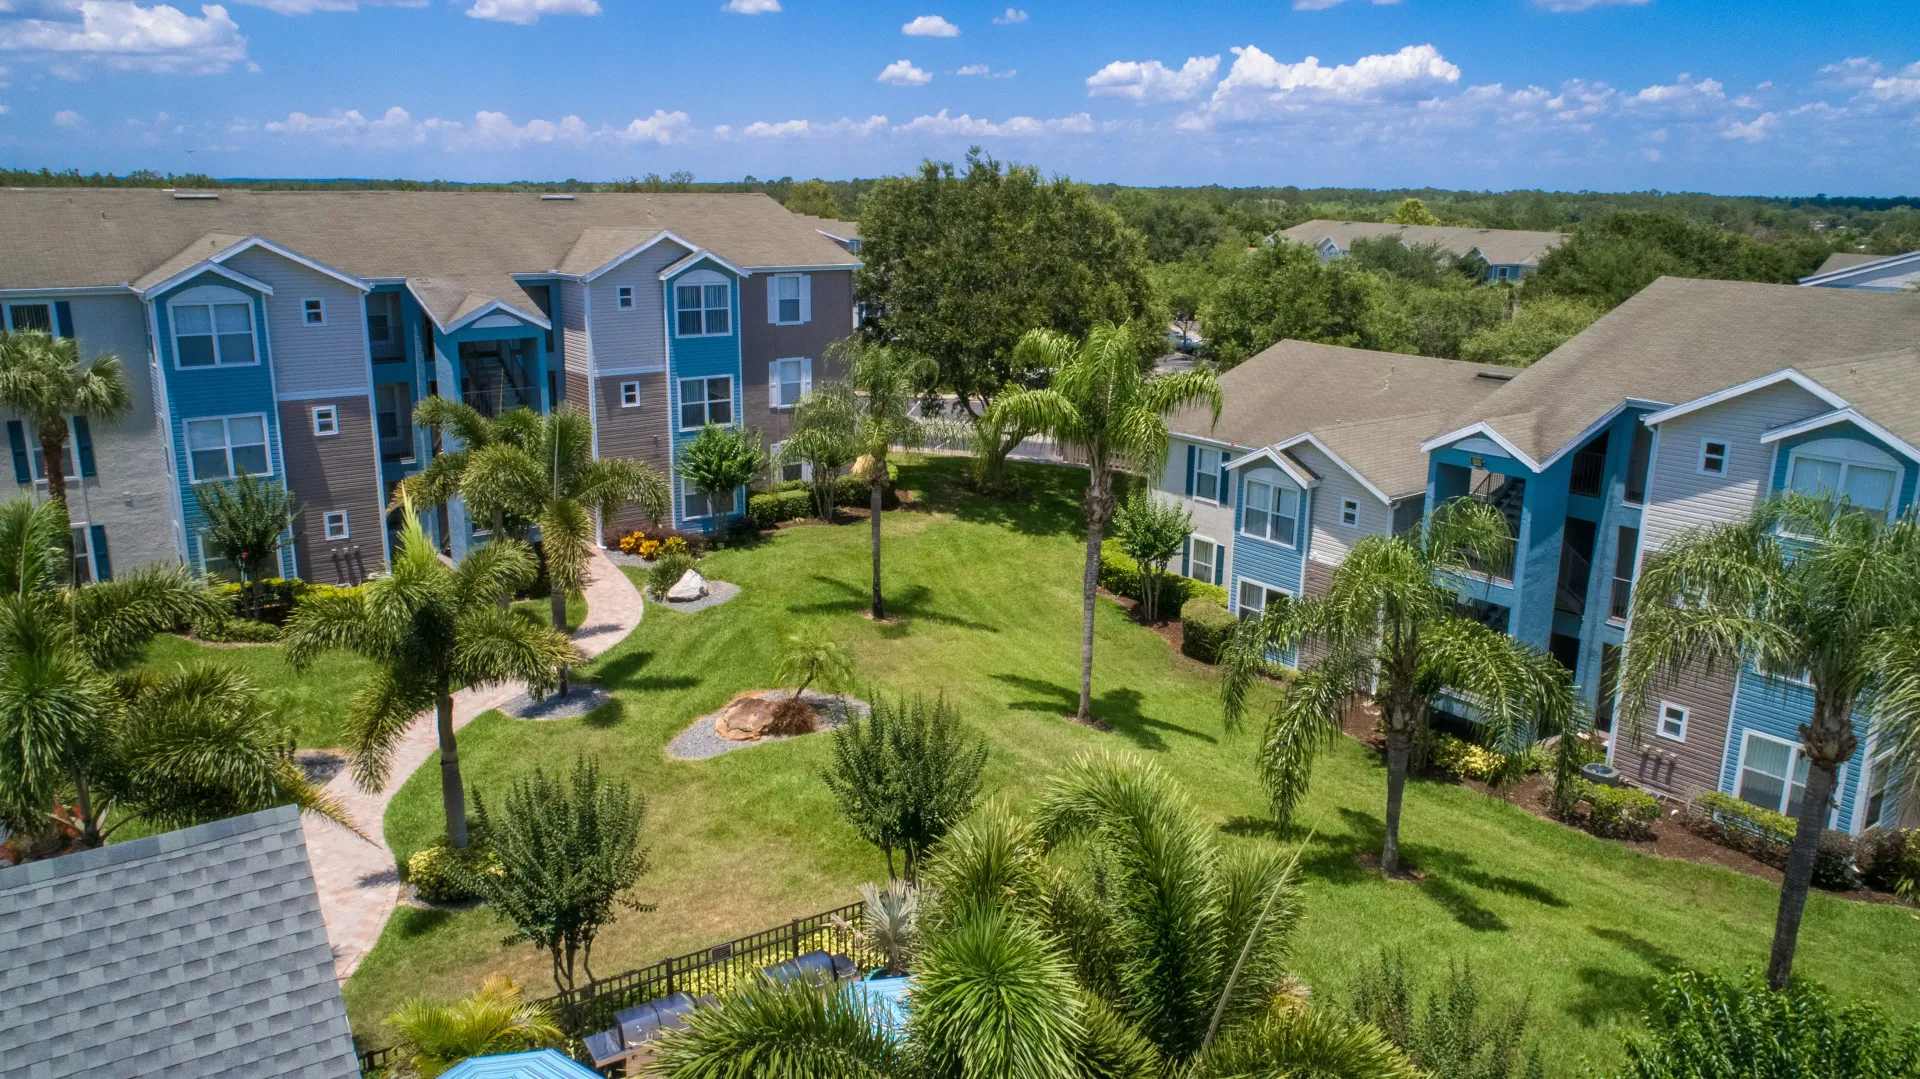 Aerial view of the well-manicured tropical landscaping and well-maintained buildings at Ashton Chase Apartments with the Clermont hills over the horizon.